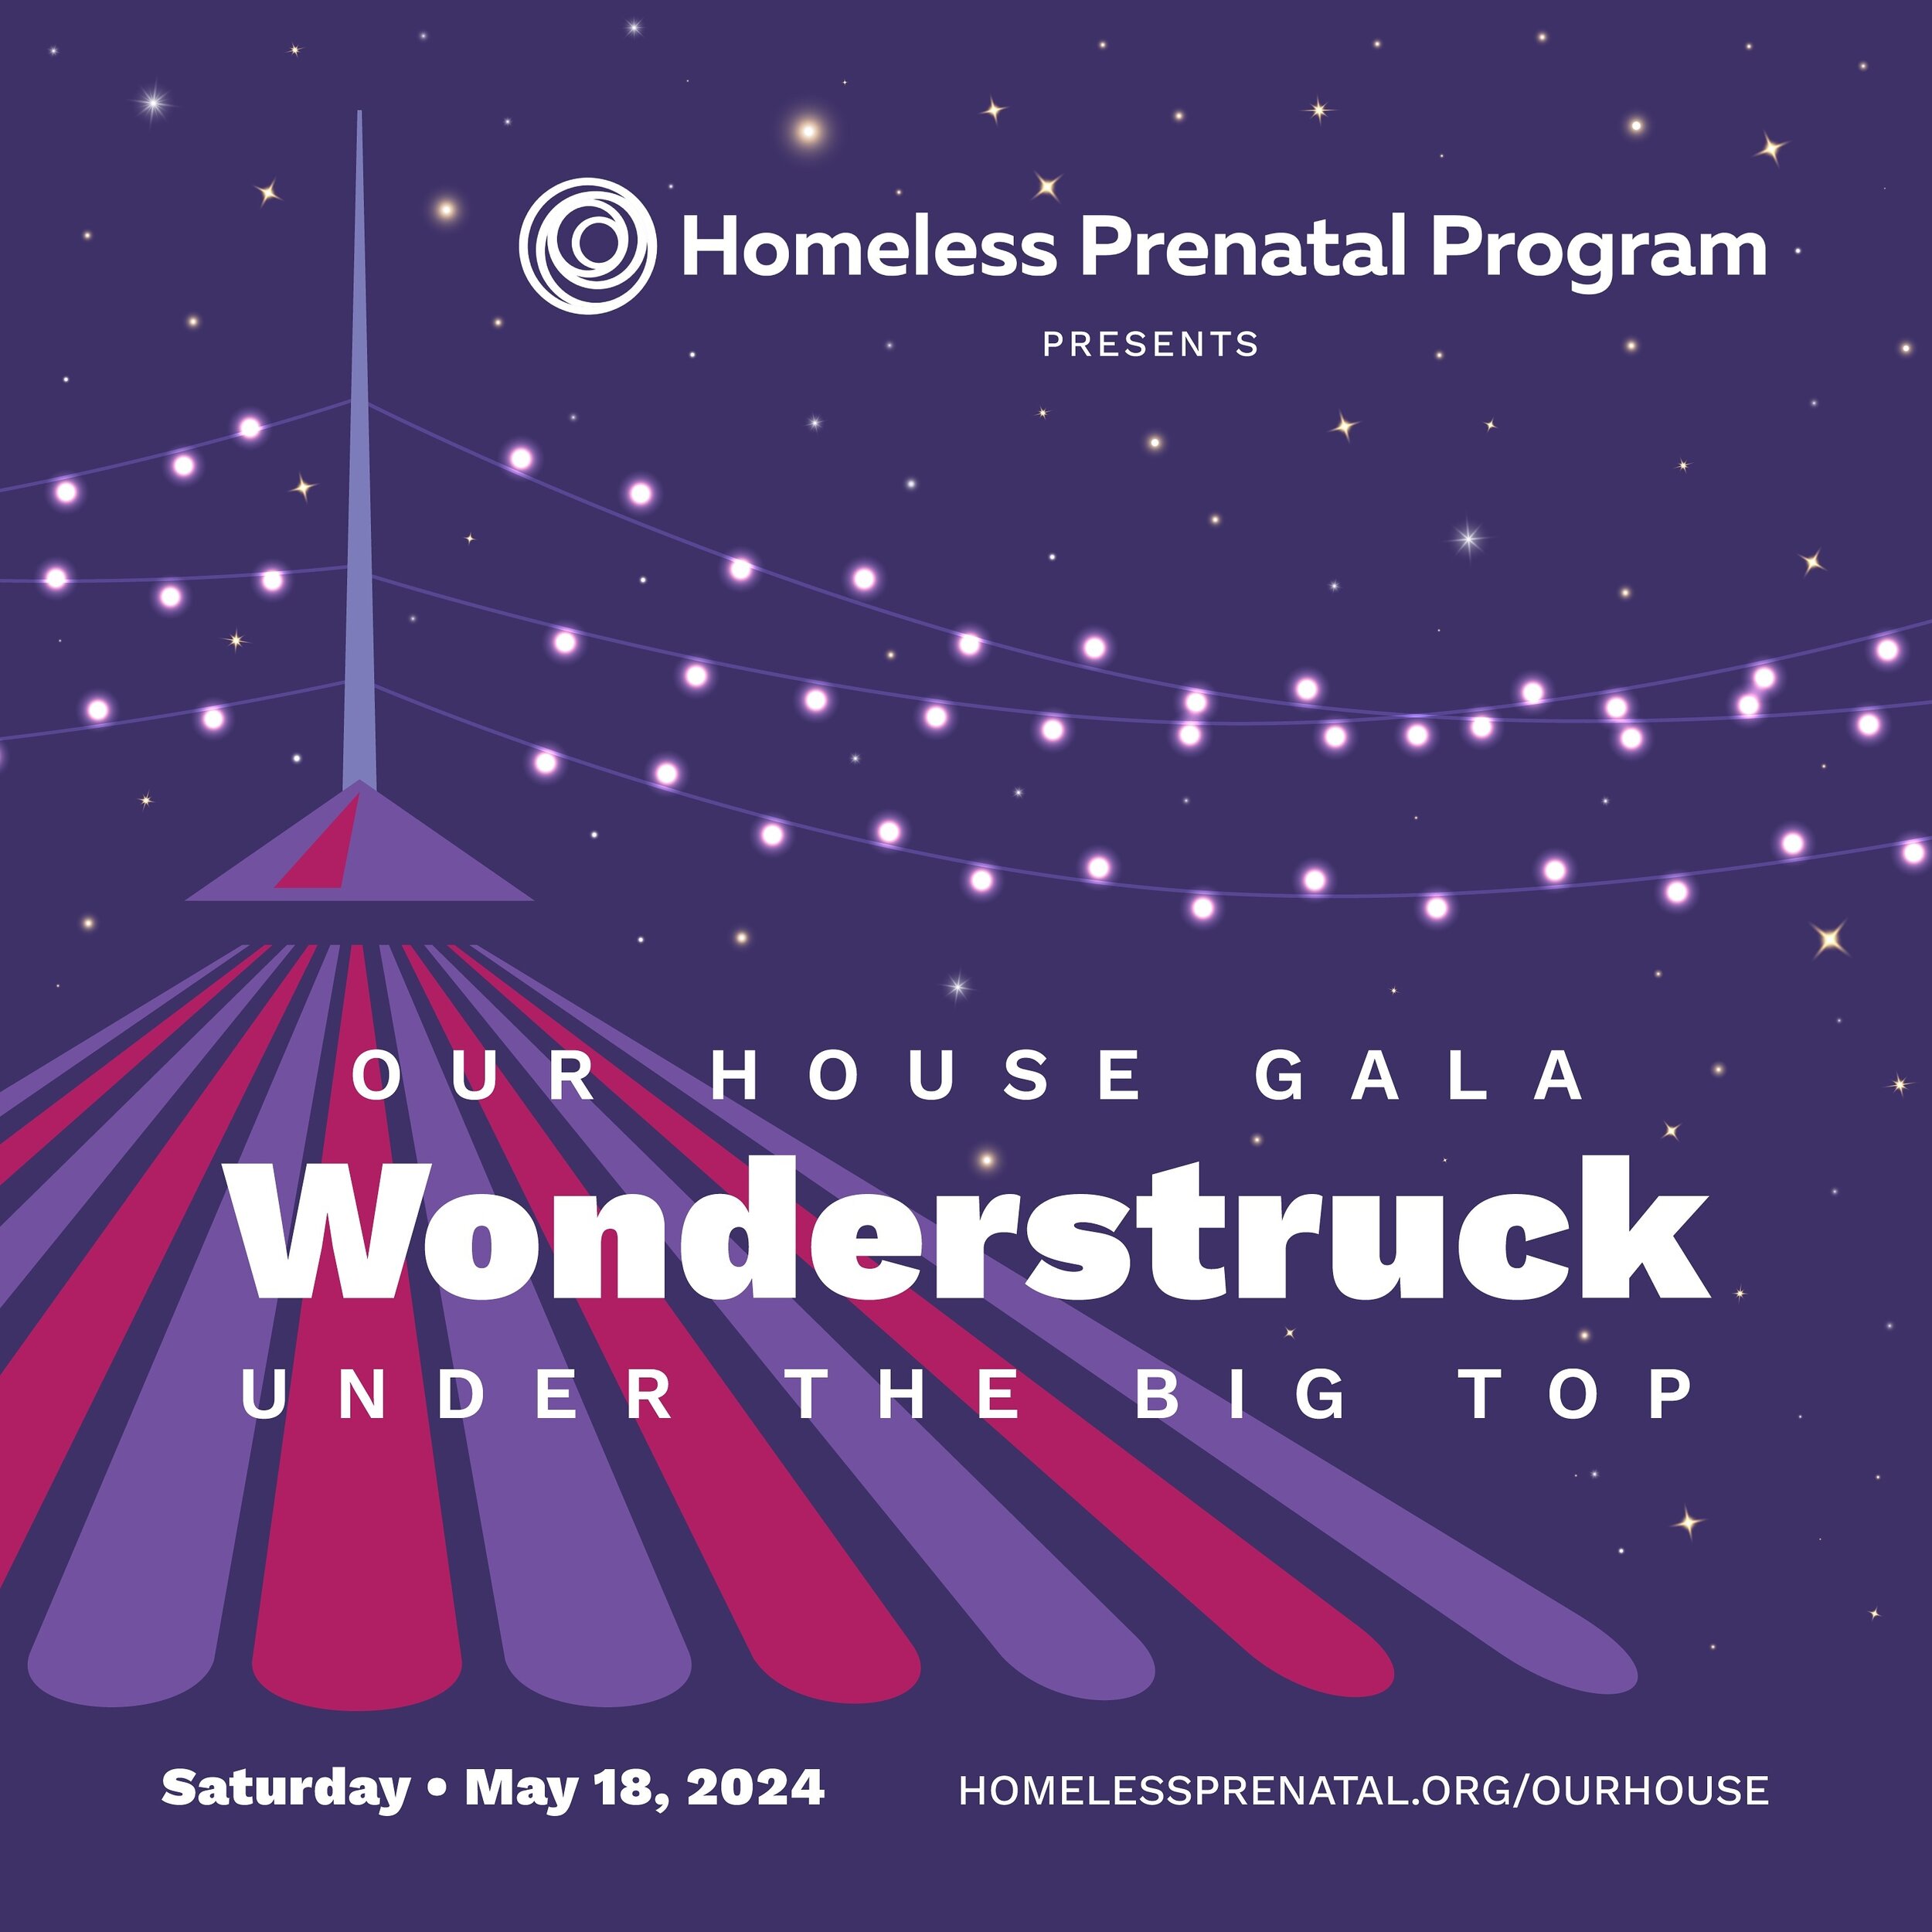 The Homeless Prenatal Program (HPP) is pleased to announce this year&rsquo;s Our House gala will be held on Saturday, May 18, 2024, kicking off HPP&rsquo;s 35th Anniversary! 

Held onsite at HPP&rsquo;s 3-story warehouse-style building in the mission